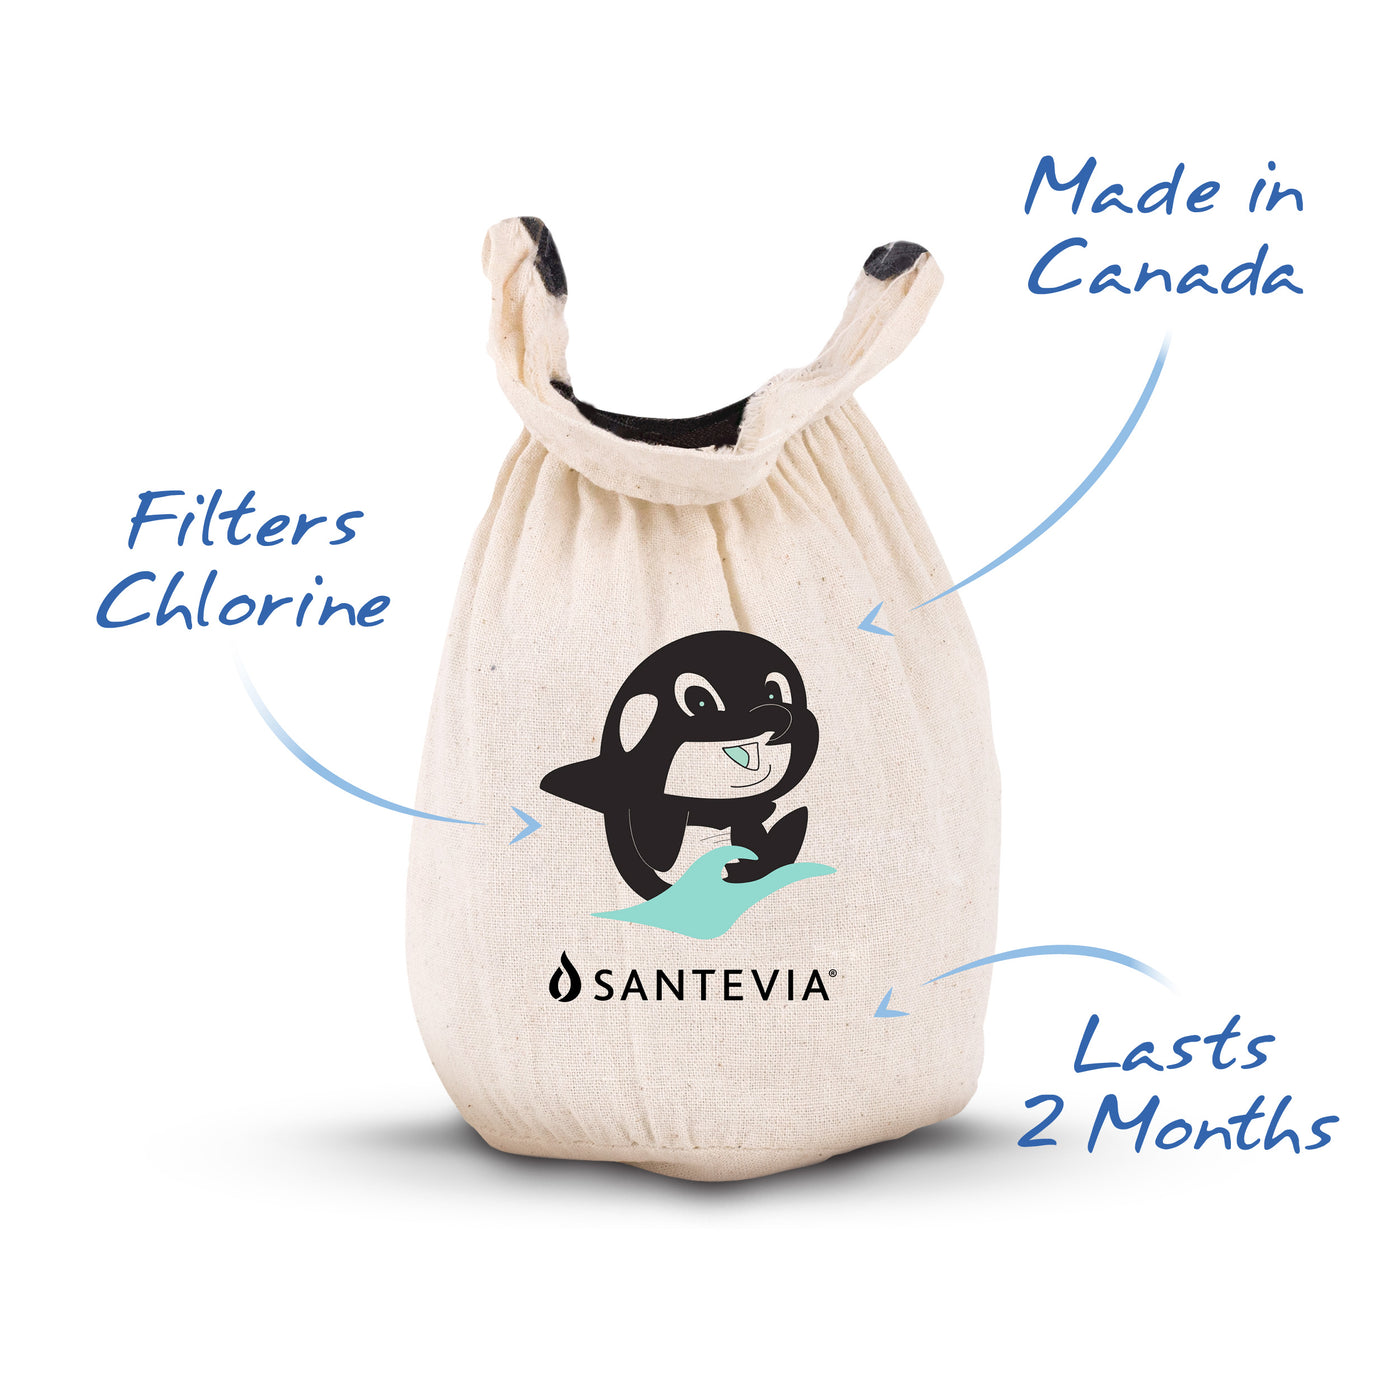 Santevia Bath Filter is Made in Canada, Filters Chlorine, and Lasts 2 Months